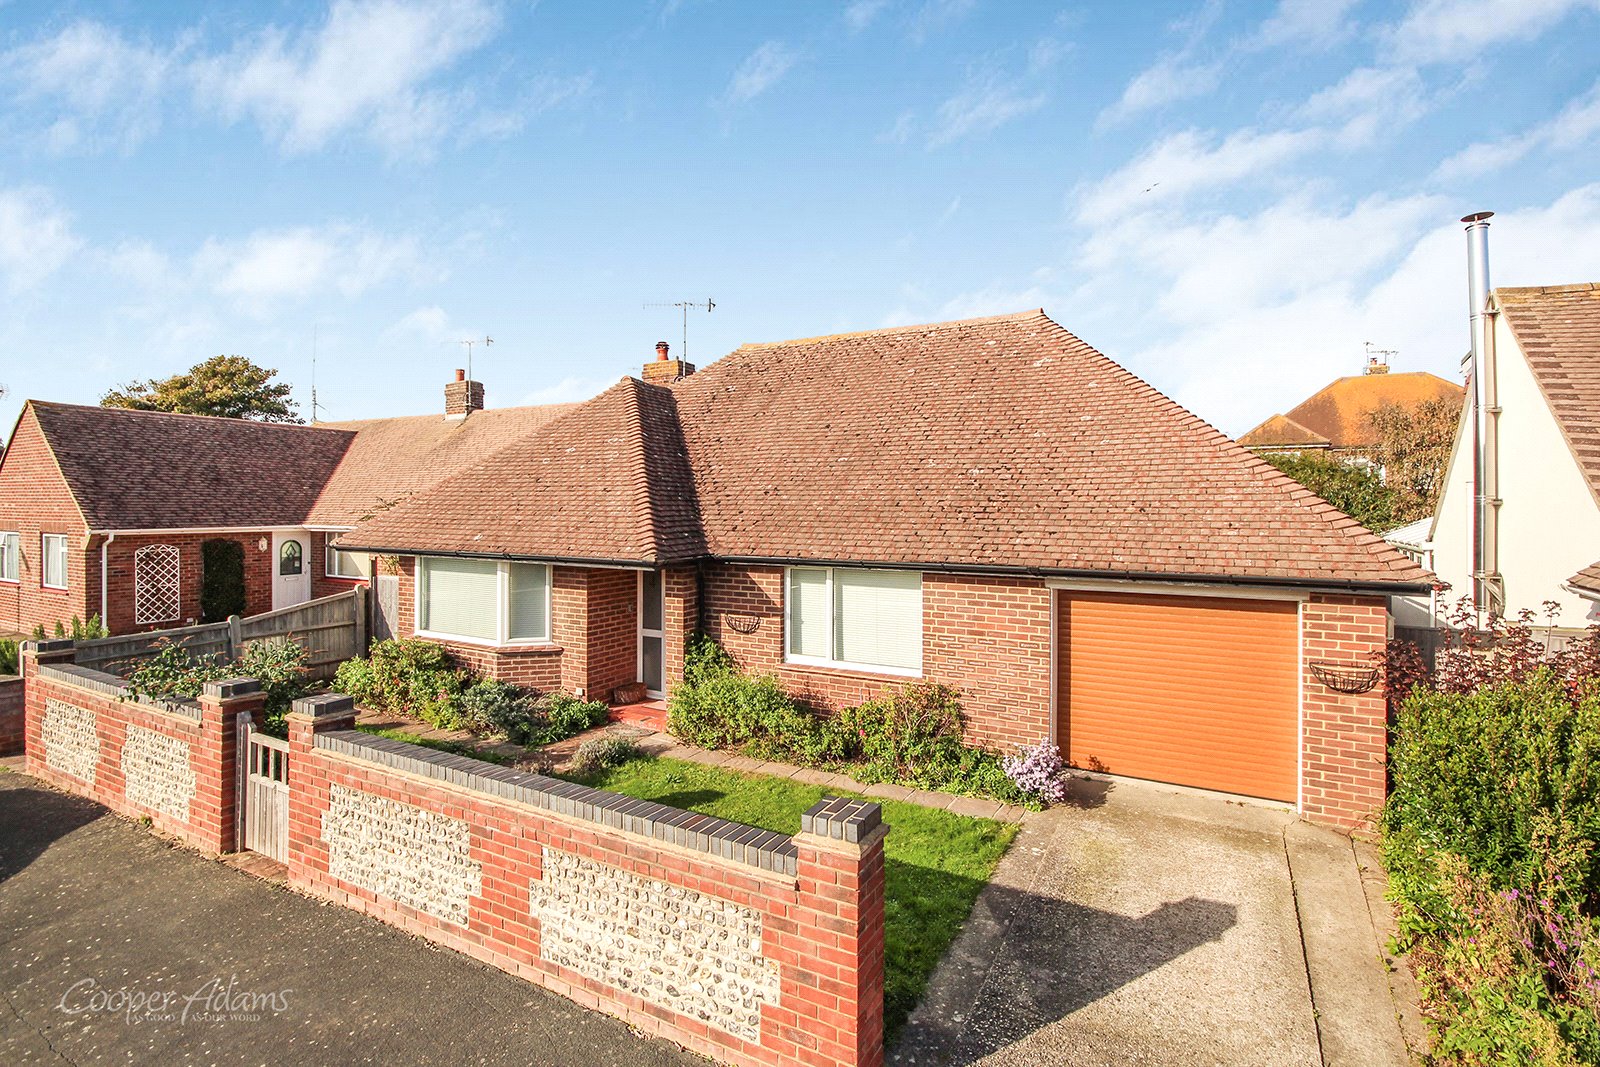 3 bed bungalow for sale in Hobbs Way, Rustington - Property Image 1